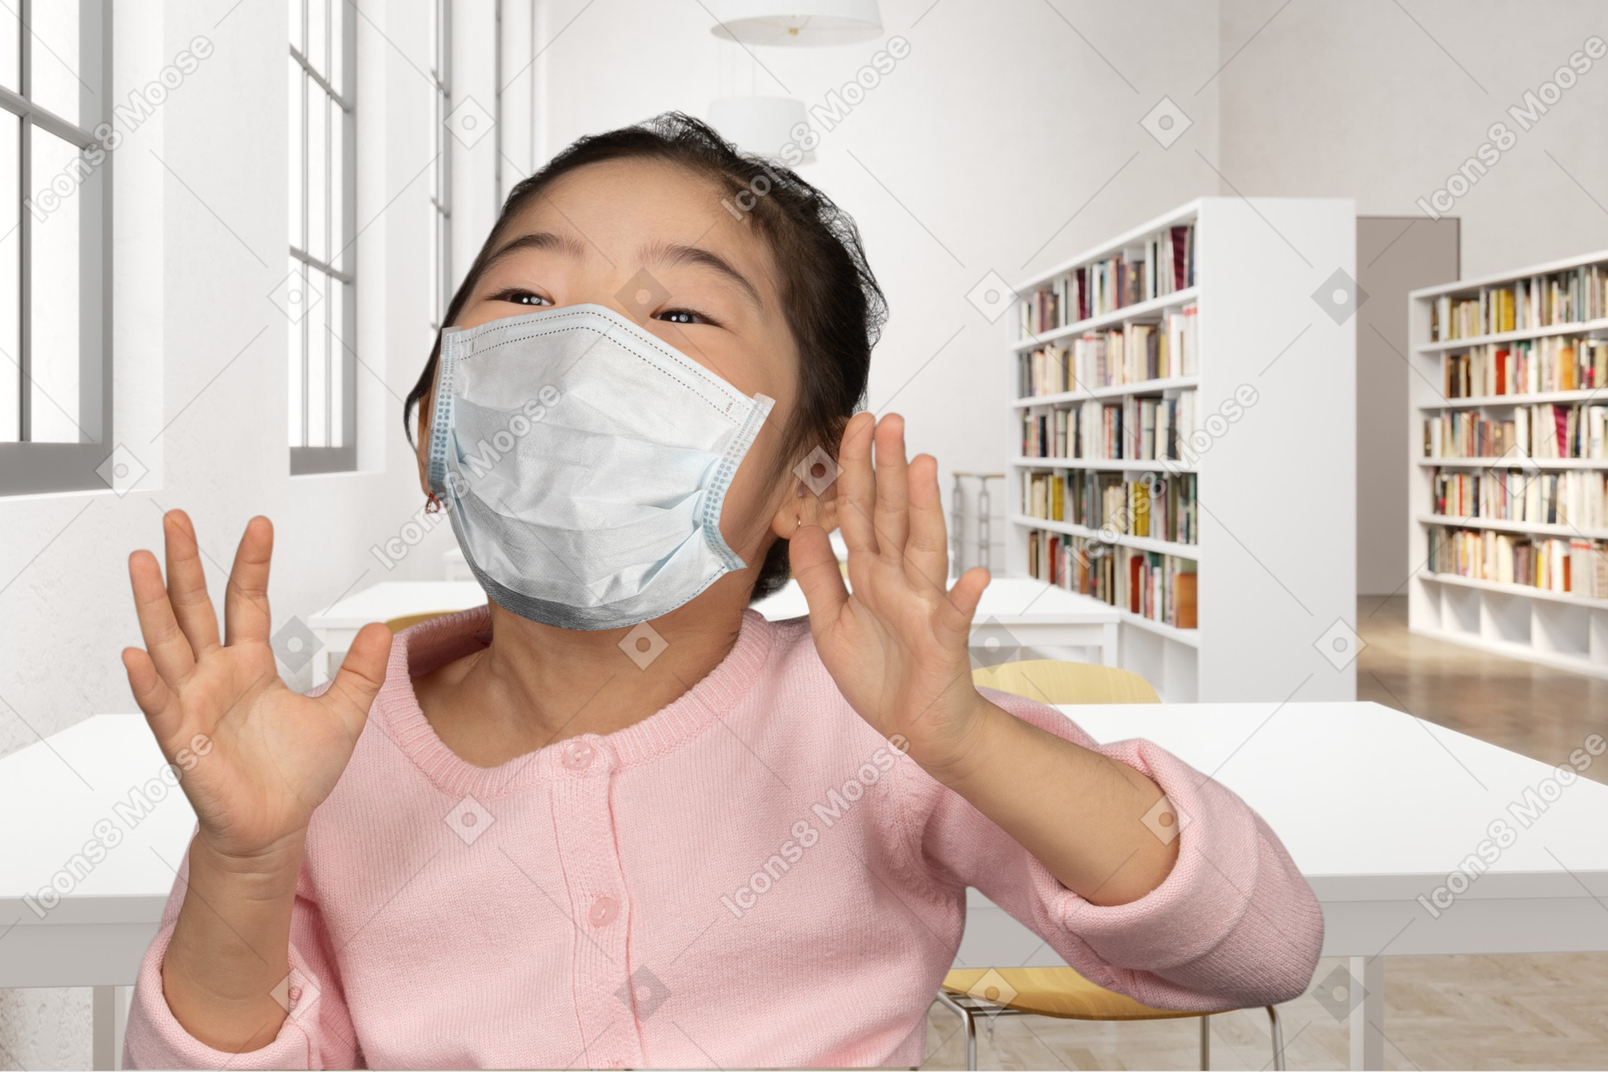 Cheerful little girl in face mask standing in a library